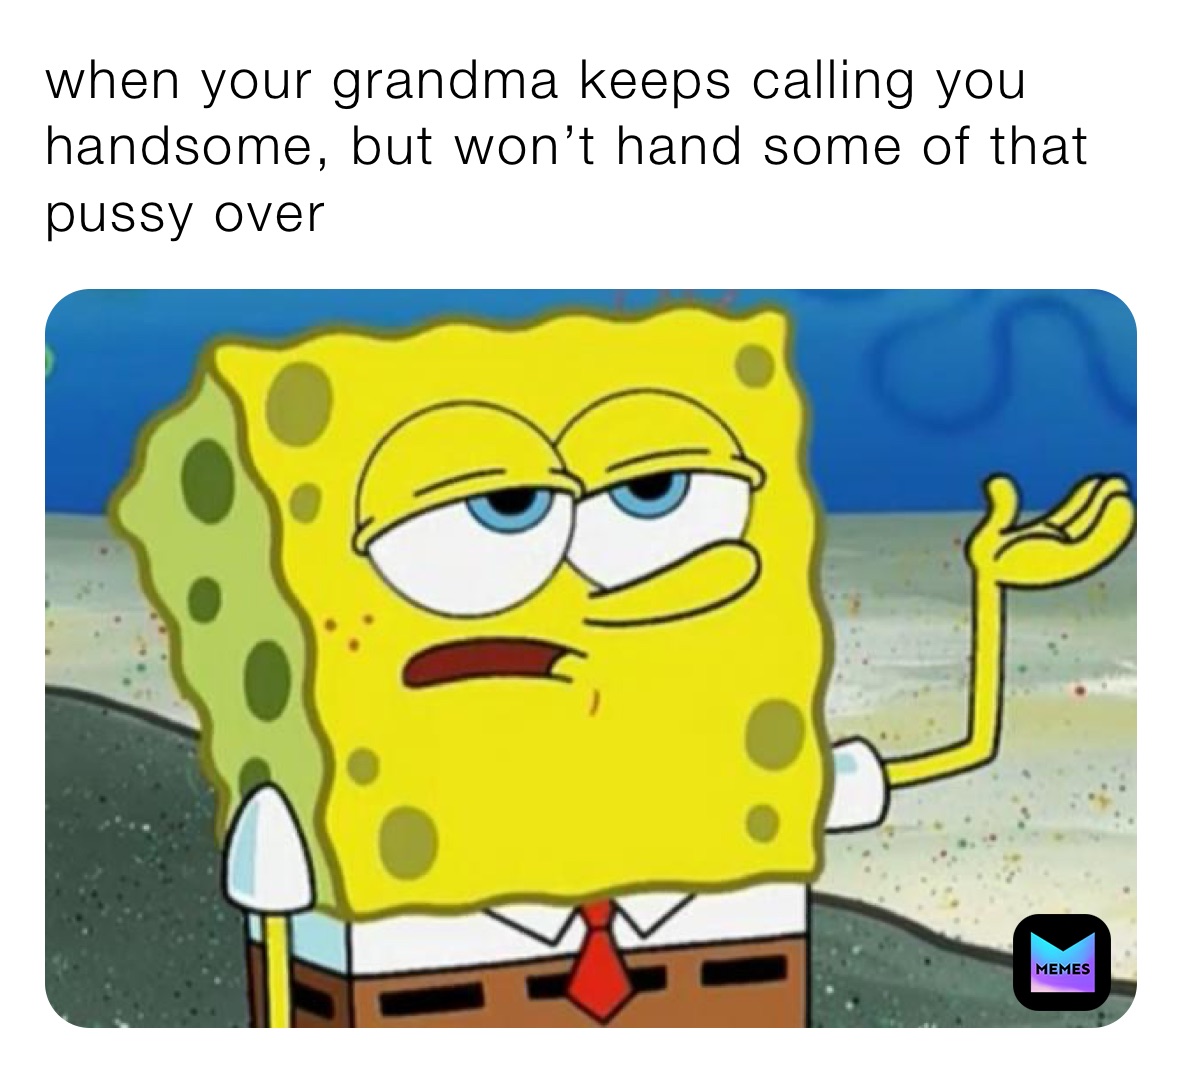 when your grandma keeps calling you handsome, but won’t hand some of that pussy over 